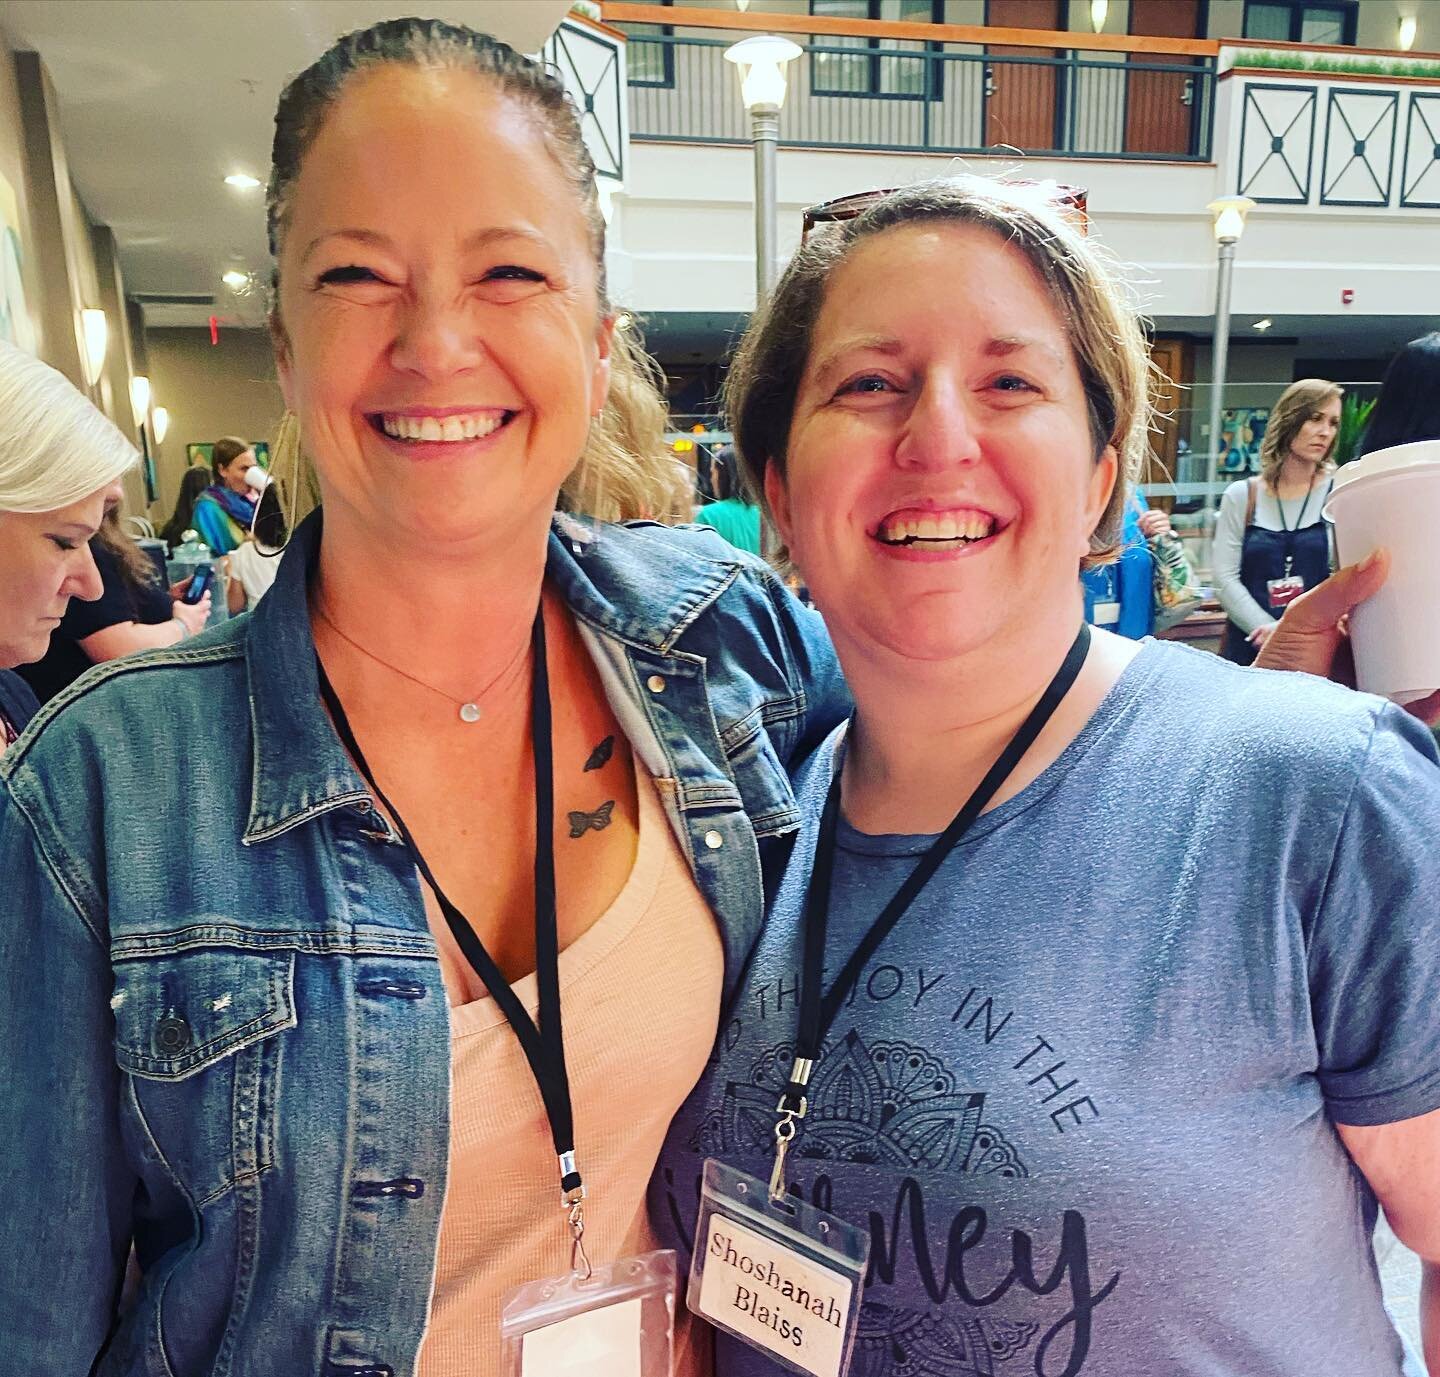 I attended the Breech/Twins Conference hosted by Beloved Holistics this past weekend. It was one of the highlights of my career so far! It was an amazing opportunity to learn from the best of the best. Each of these people have been educating, encour